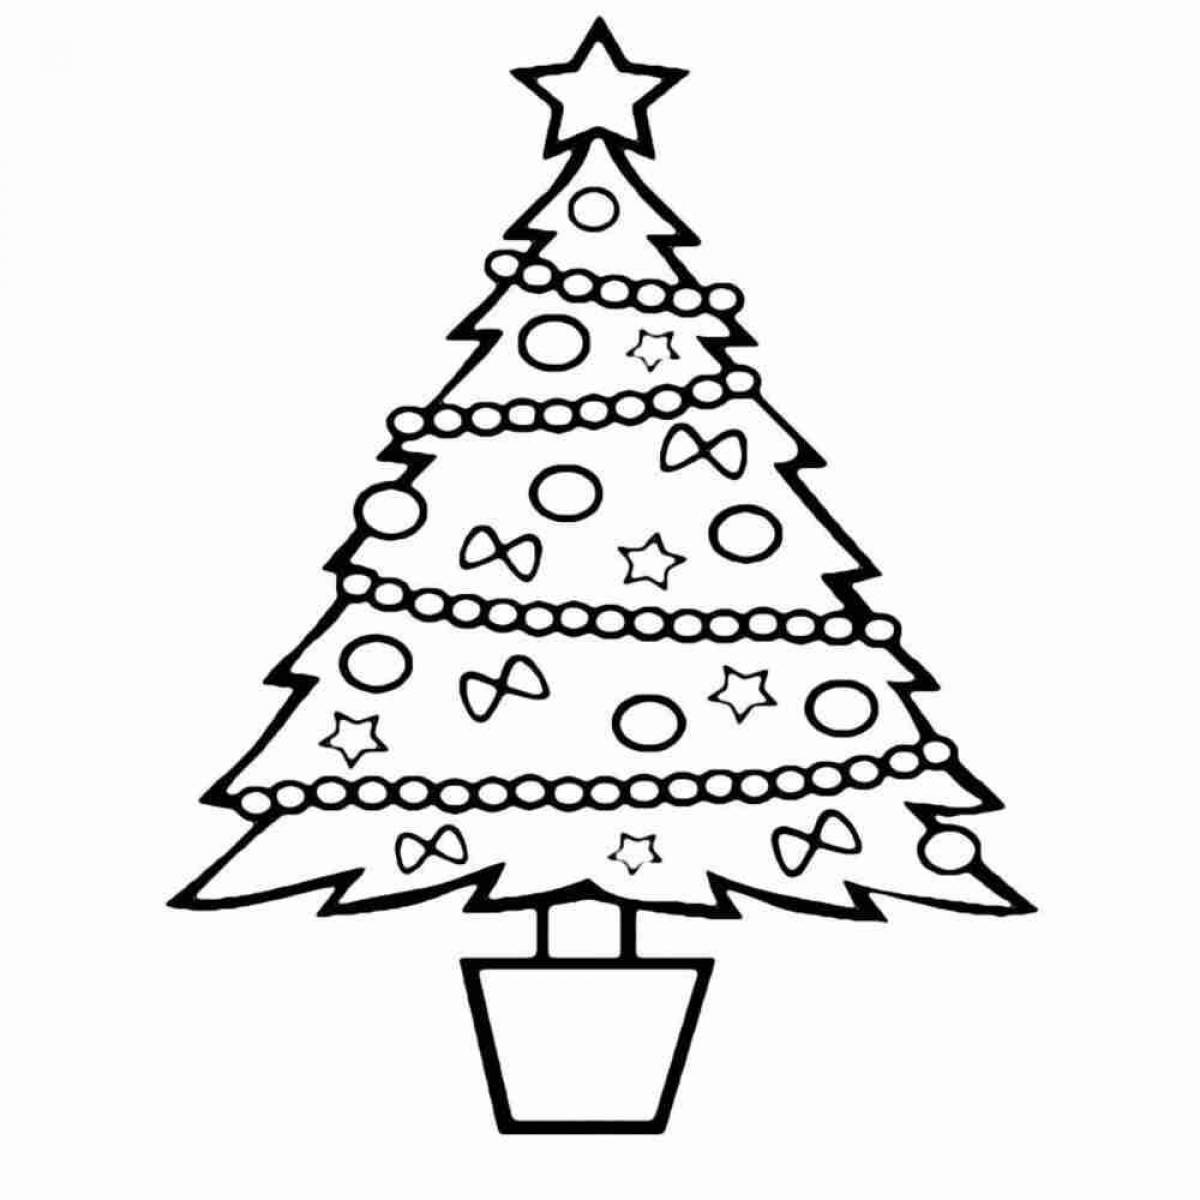 Colorful Christmas tree coloring book